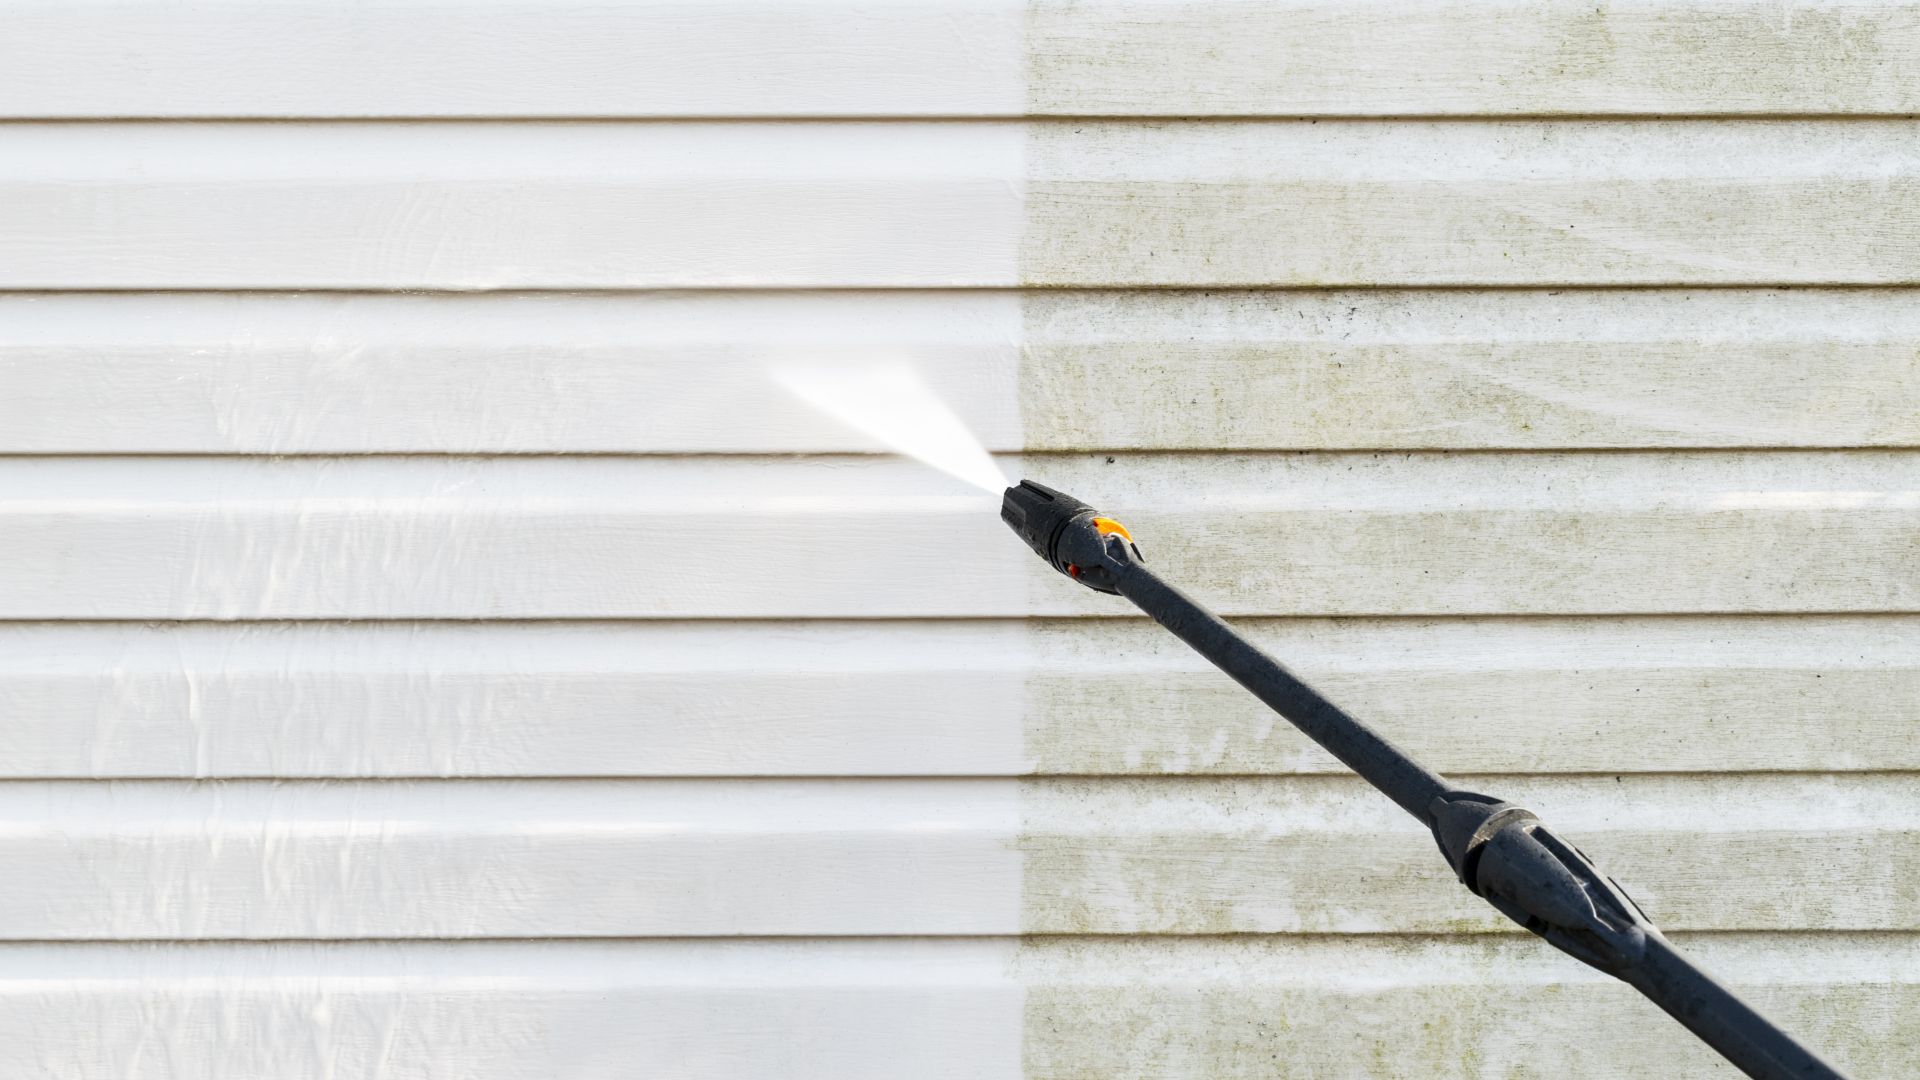 exterior and window cleaning in San Francisco services like pressure washing